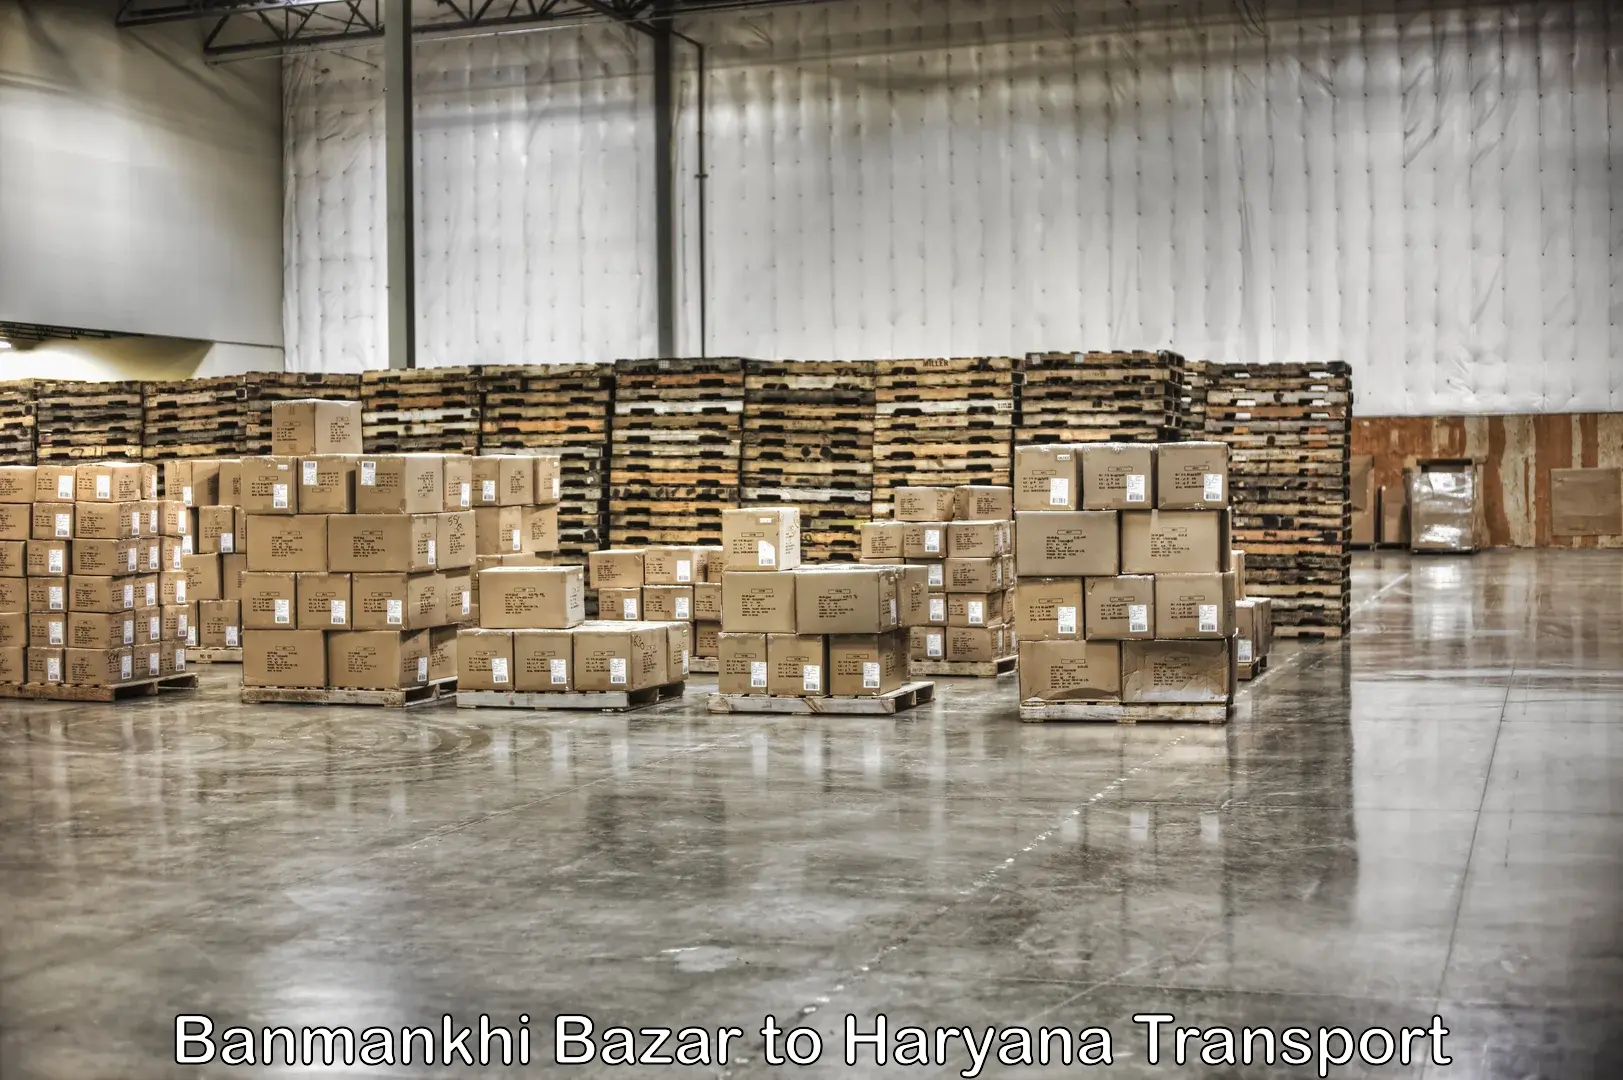 Air freight transport services Banmankhi Bazar to NCR Haryana